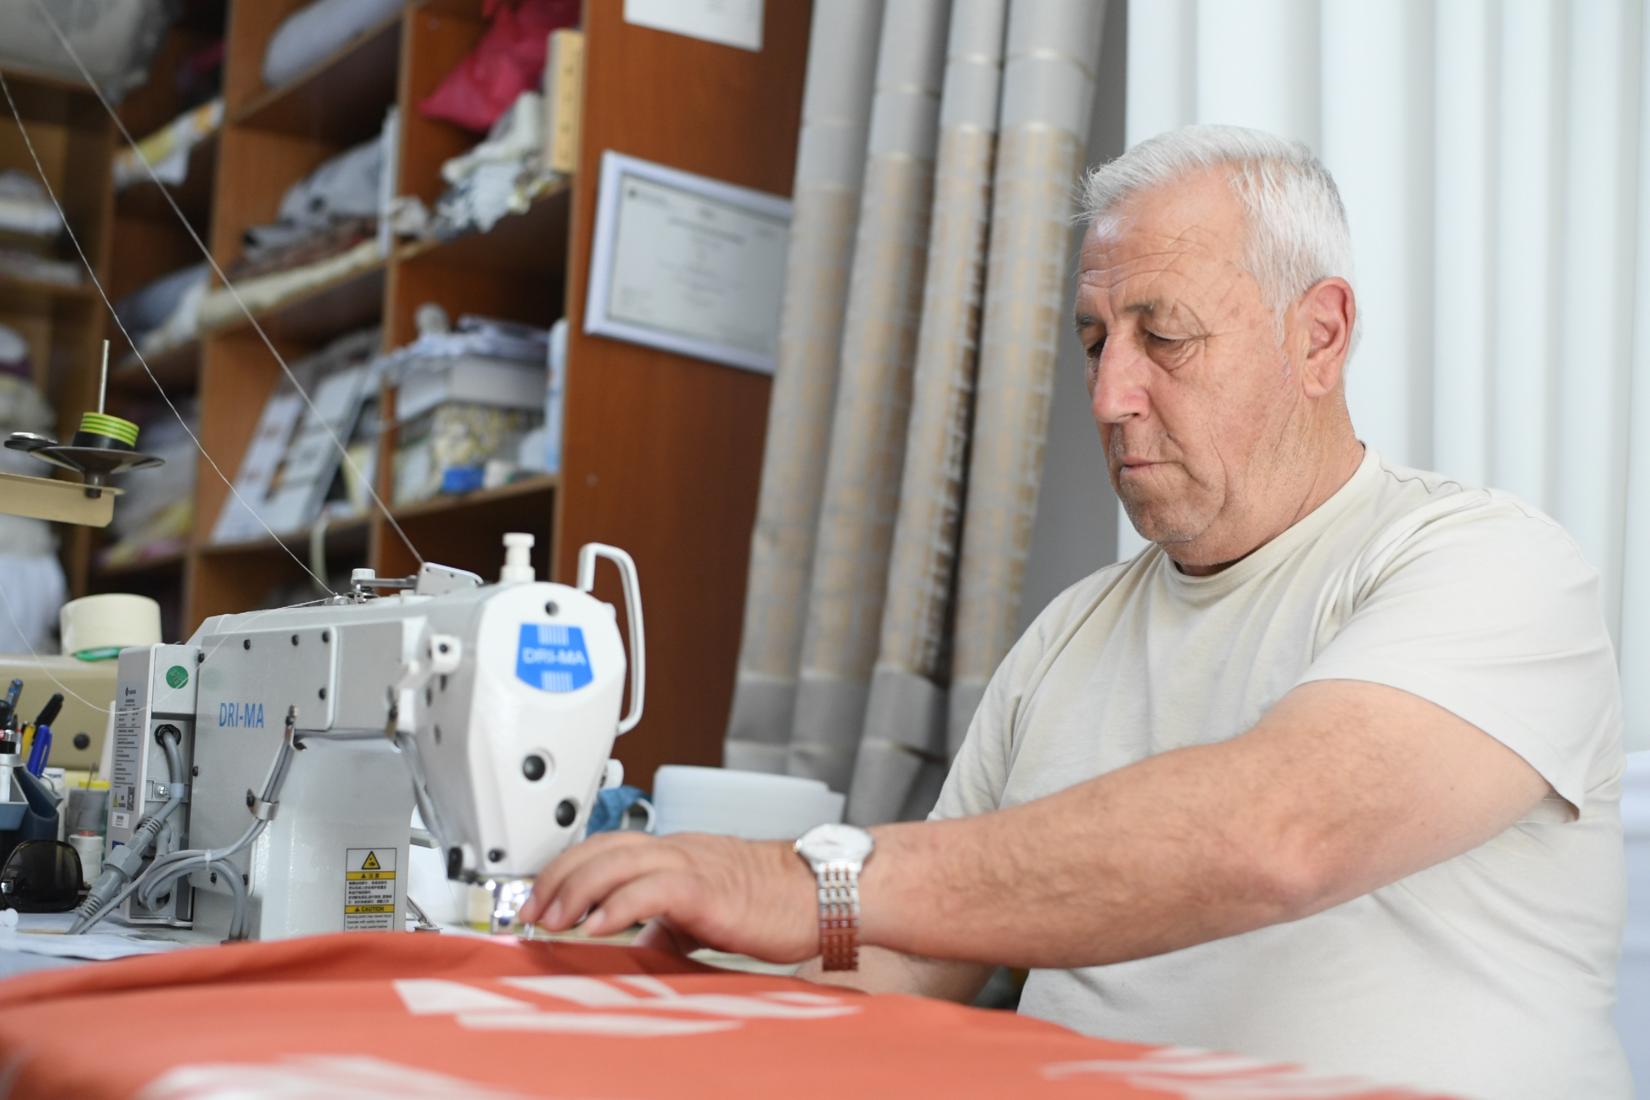 The In Motion programme equipped Rifat with a new sewing machine, and a drill, enabling him to provide services both at home and at other businesses.